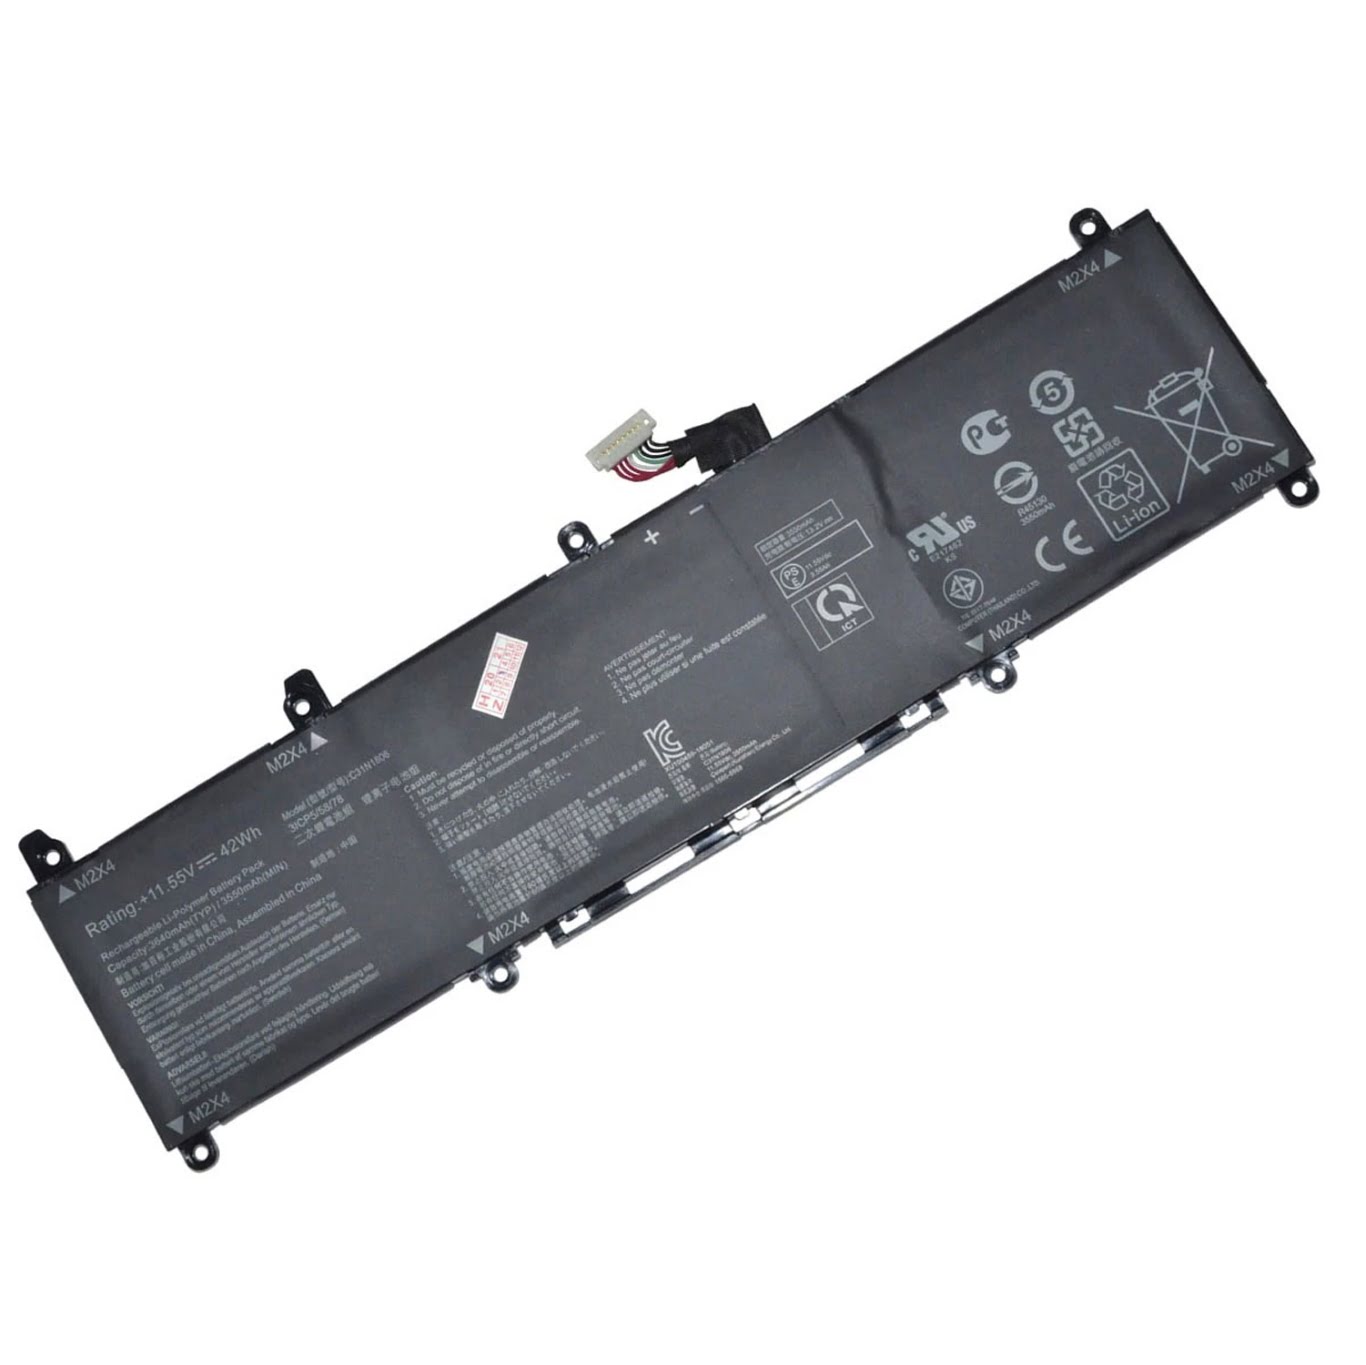 Asus 0b200-02960000, 0b200-03030000 Laptop Battery For Adol 13, Adol 13fa replacement